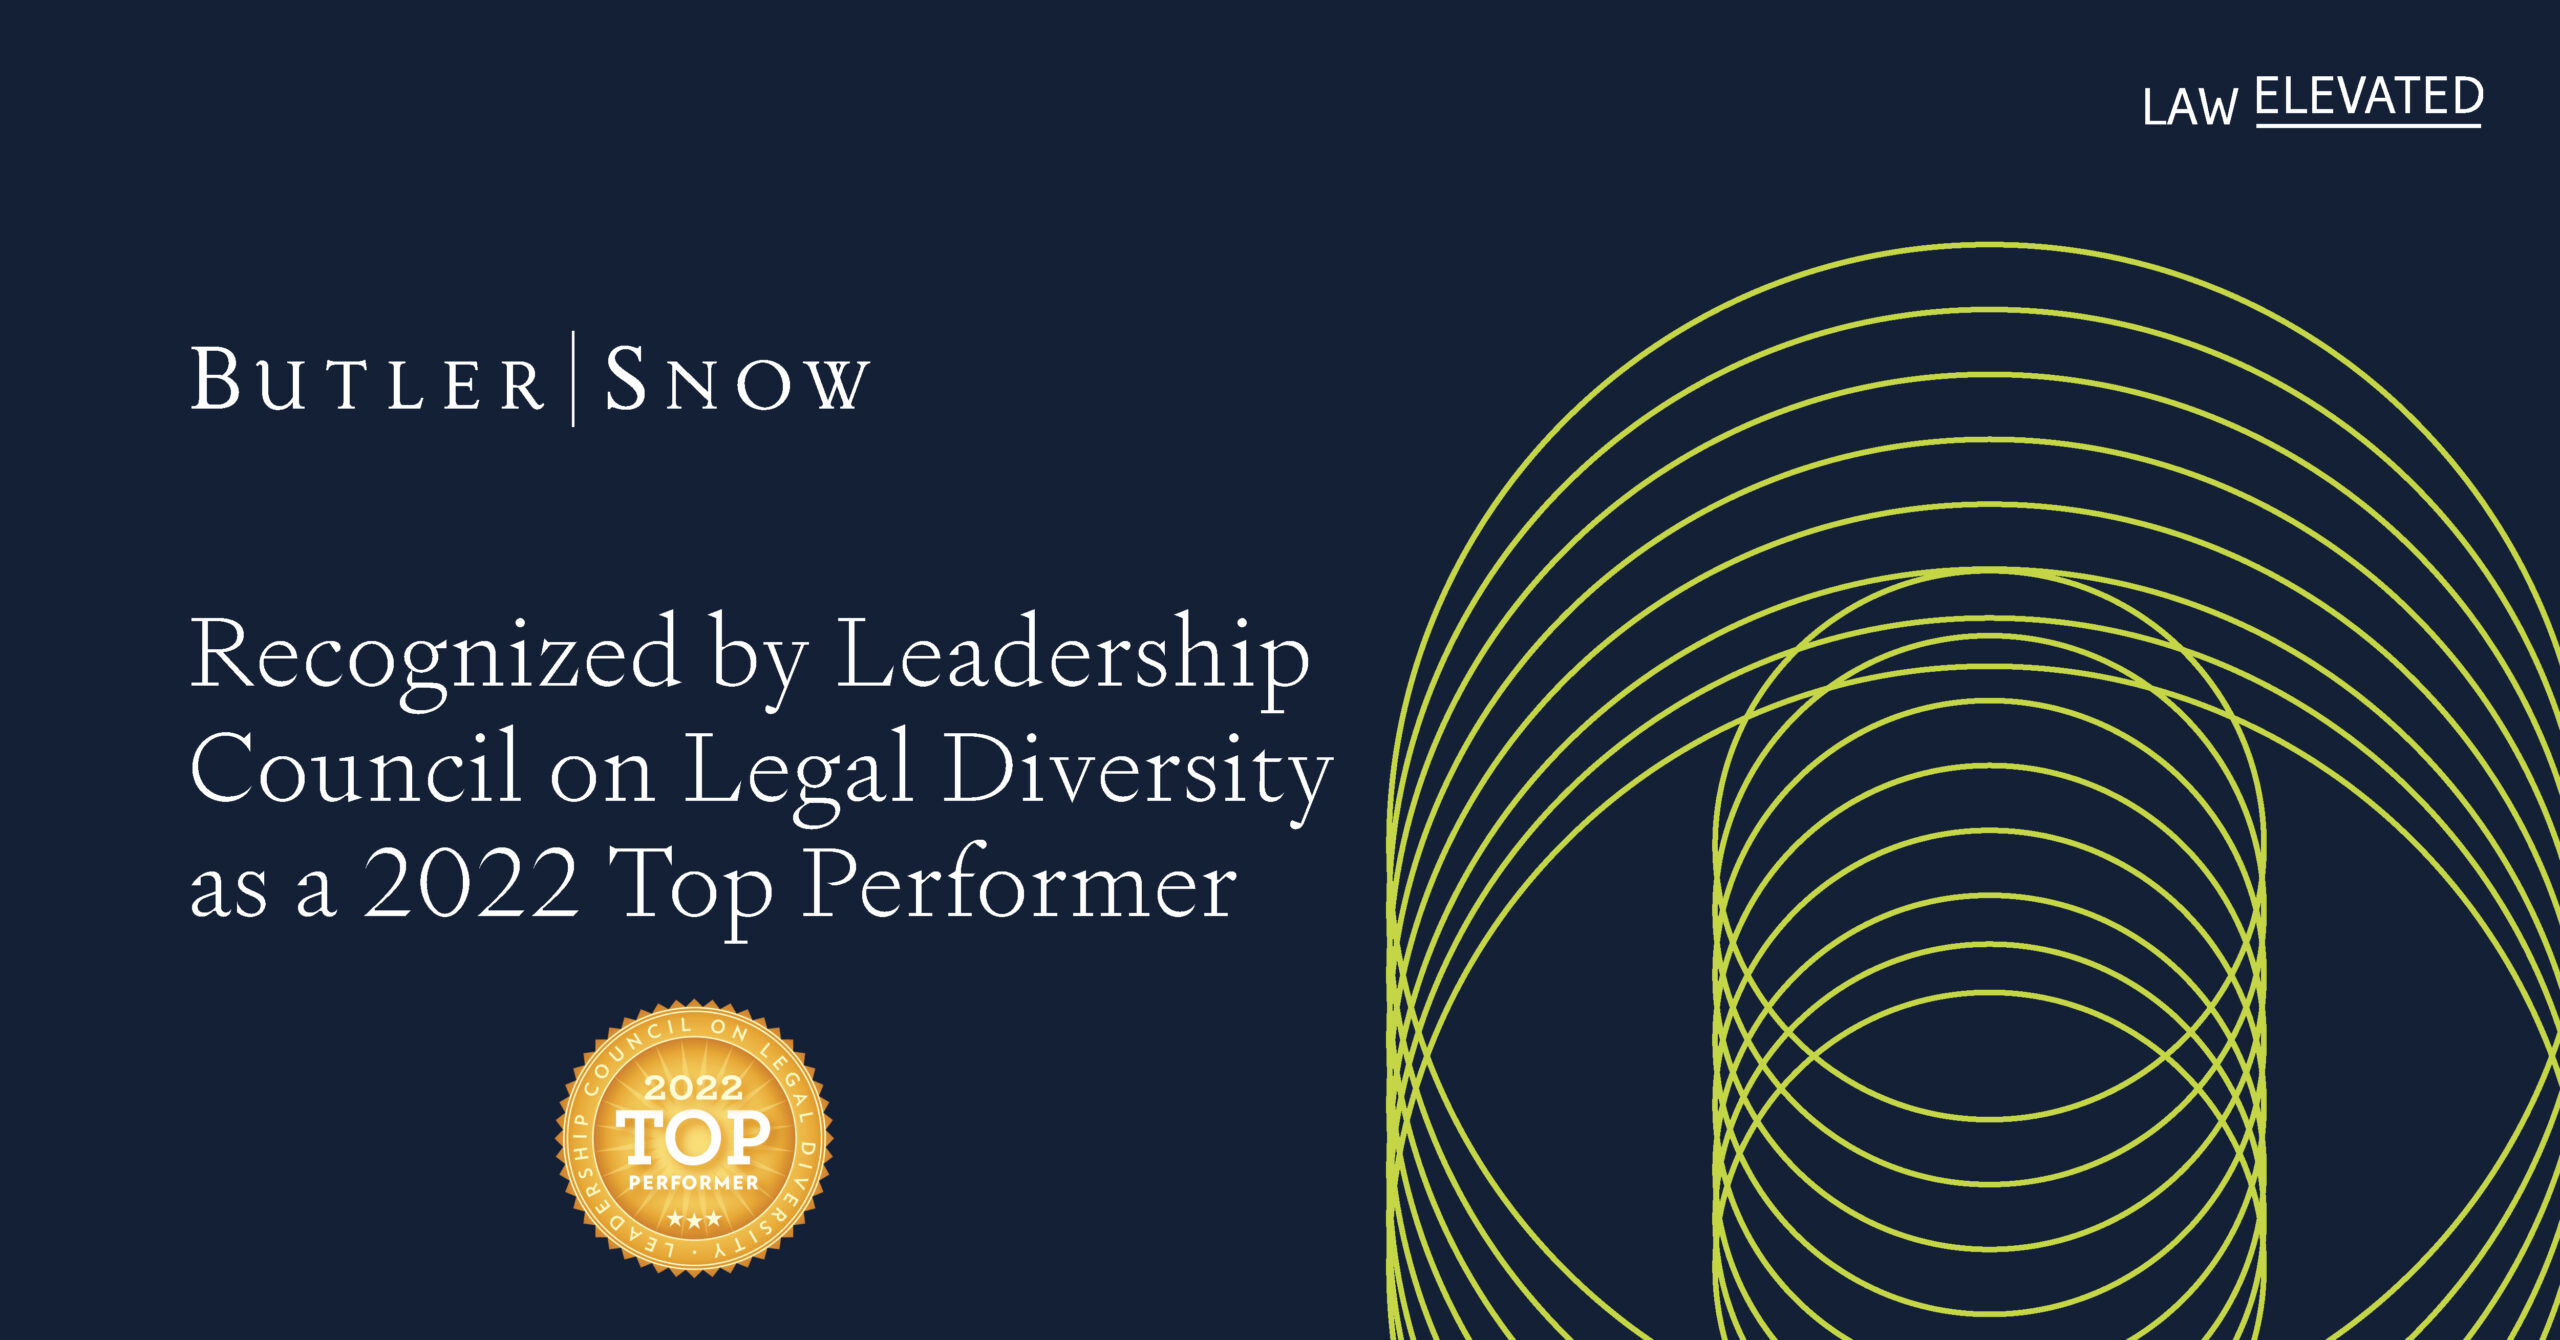 Butler Snow Recognized by Leadership Council on Legal Diversity as a 2022 Top Performer